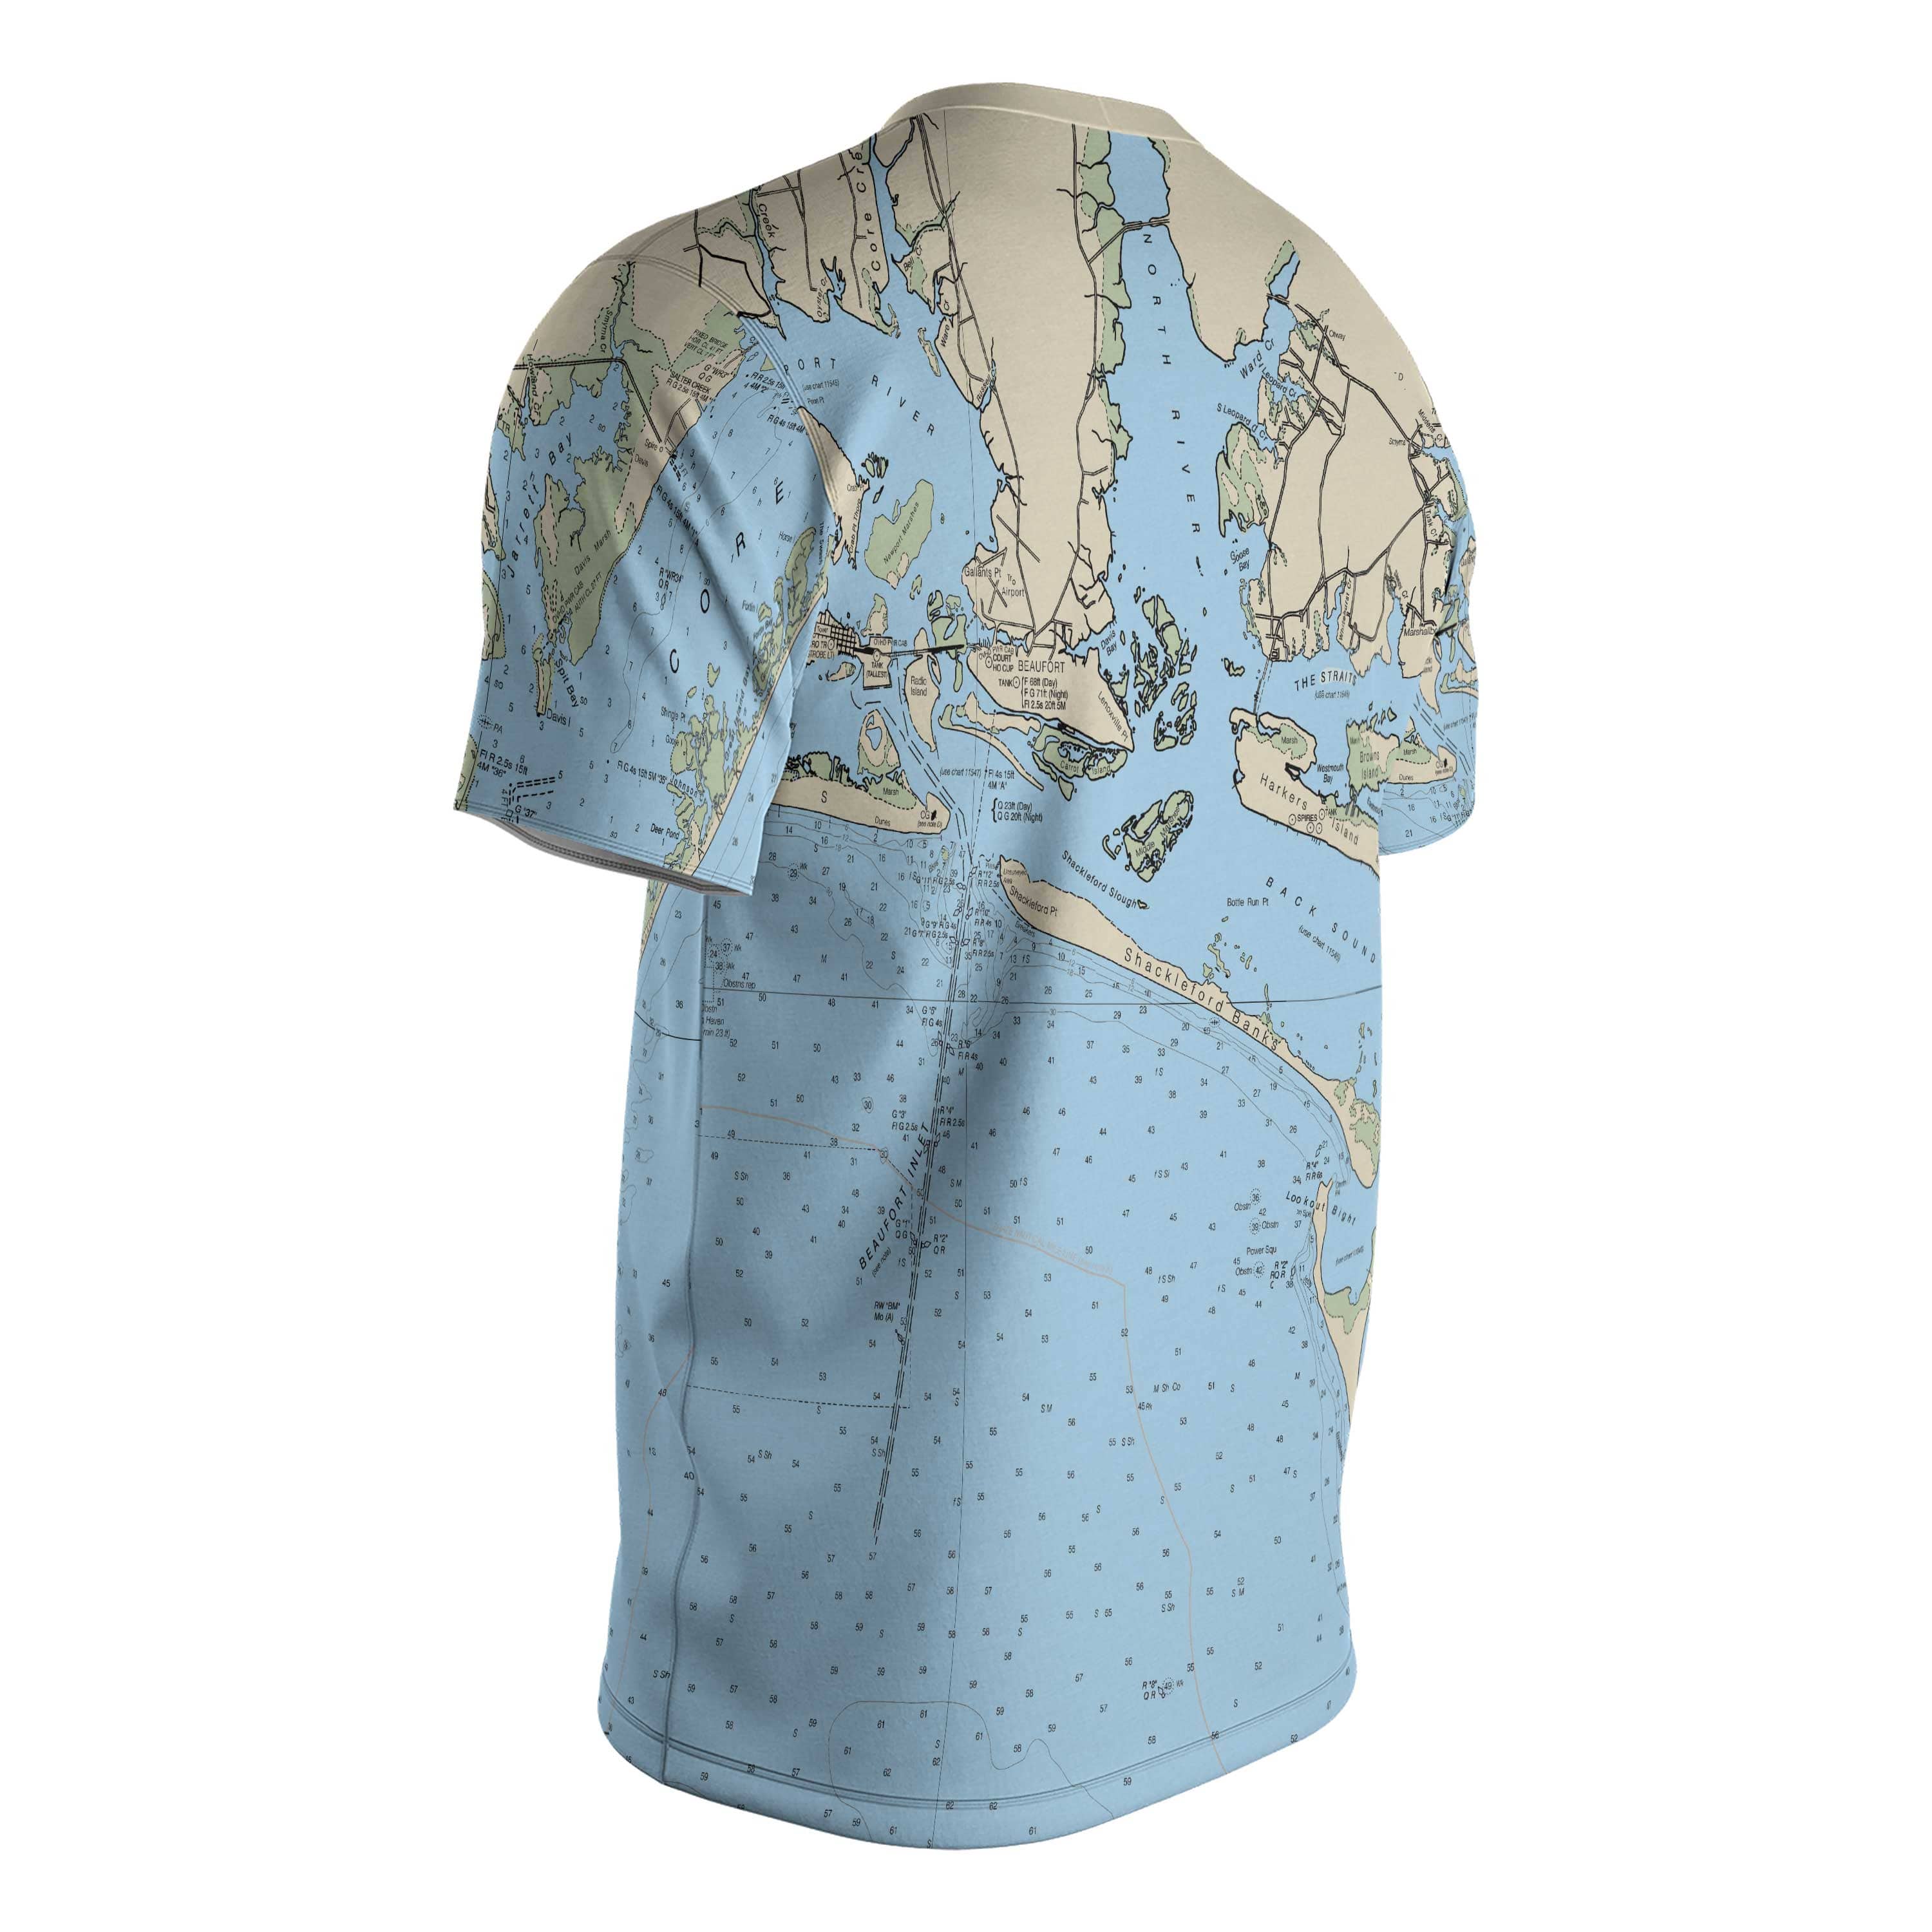 The Beaufort and Cape Lookout Mariner Short Sleeve Performance Tee